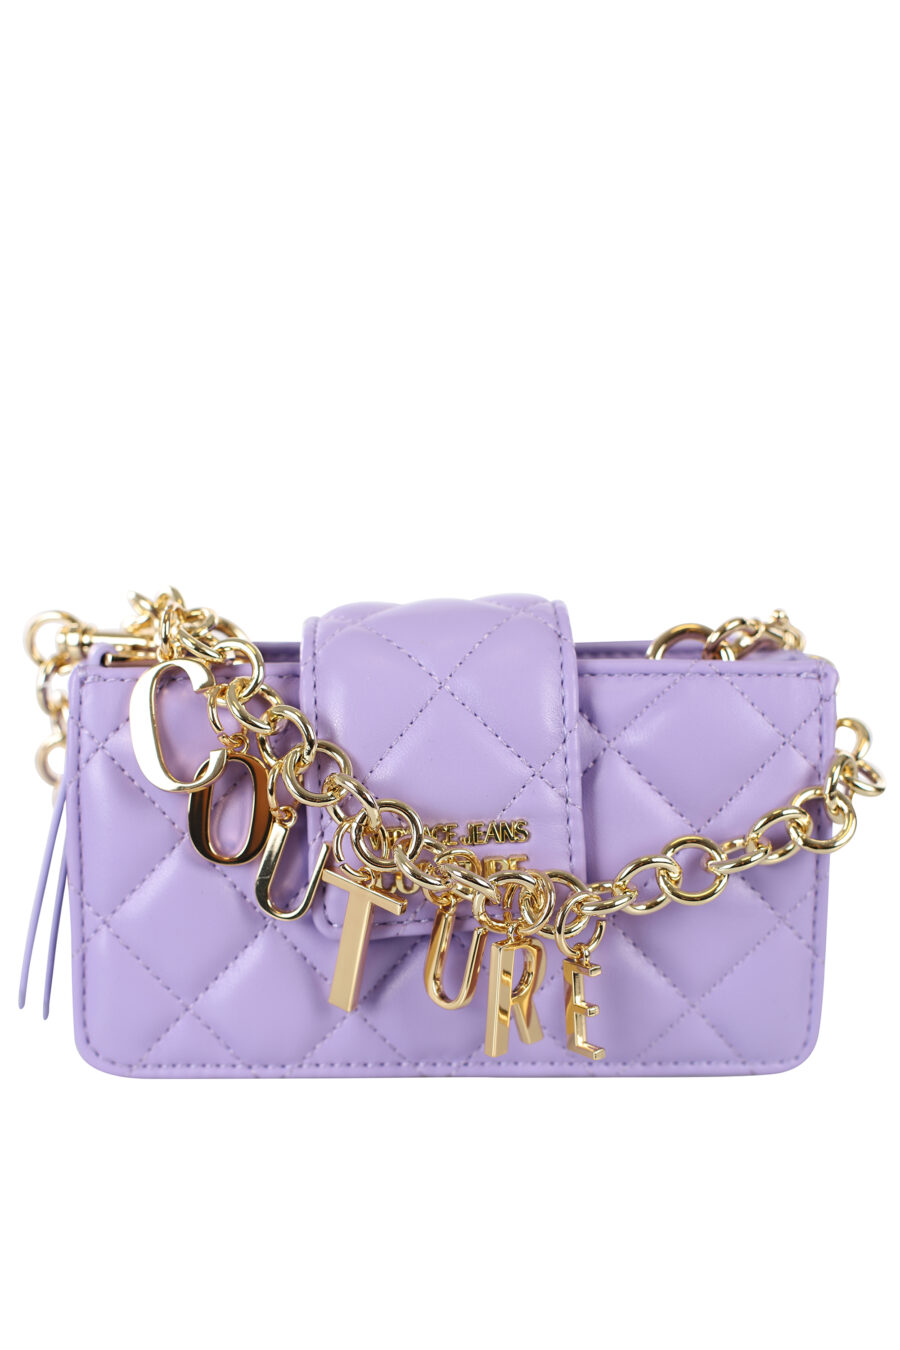 Purple shoulder bag with chain charms - IMG 7251